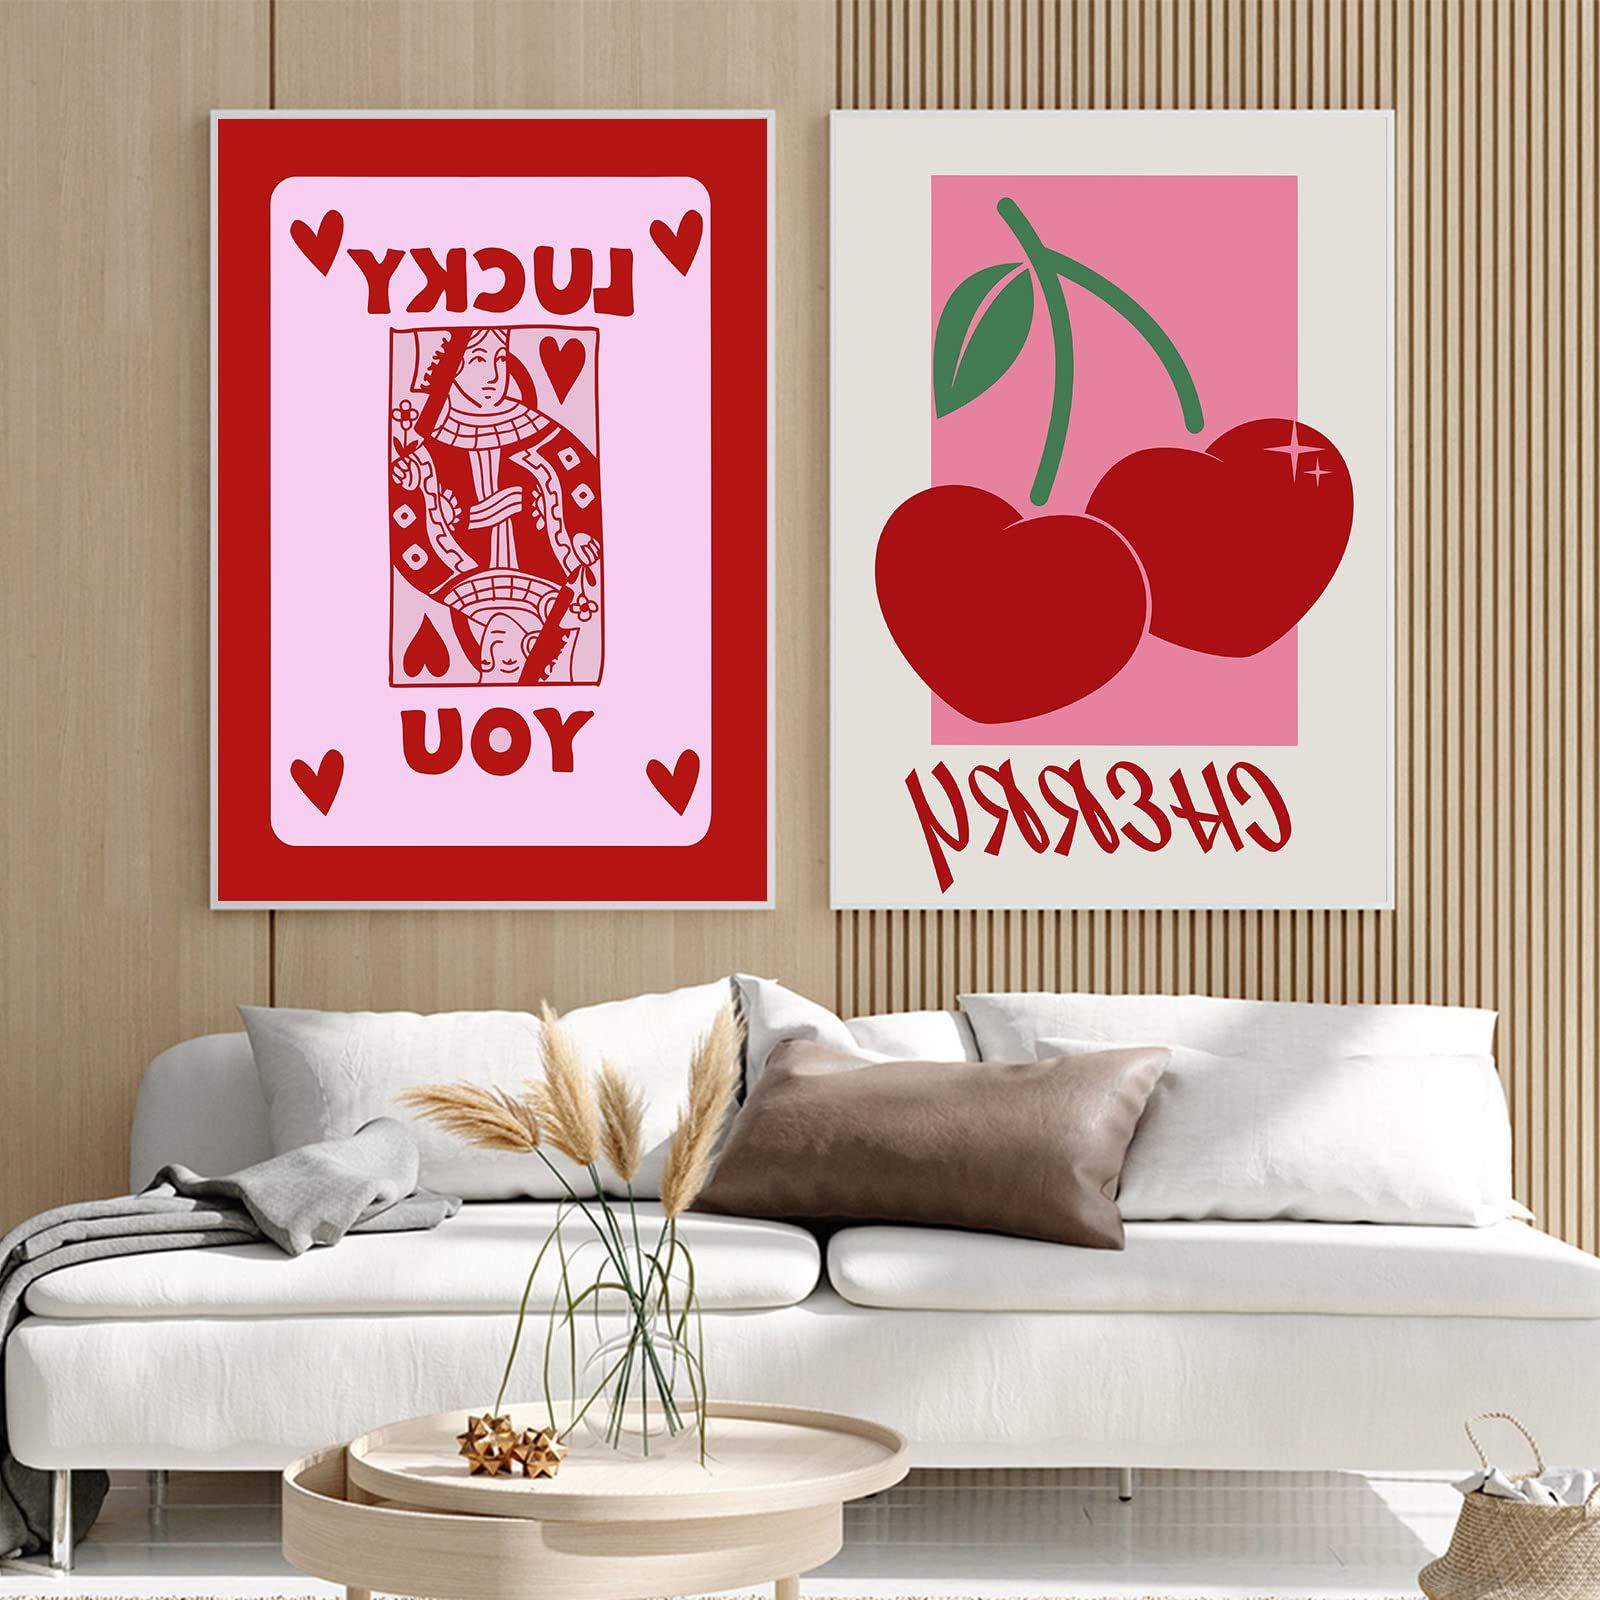 Favorite Amazon: Pink Aesthetic Canvas Wall Art Queen Of Heart Painting Red And  Pink Poster Playing Cards Prints Cherry Fruit Canvas Art Lucky You Art  Print Preppy Room Decor Girls Room Decor 16x24inchx2pcs Inside Aesthetic Wall Art (View 4 of 15)